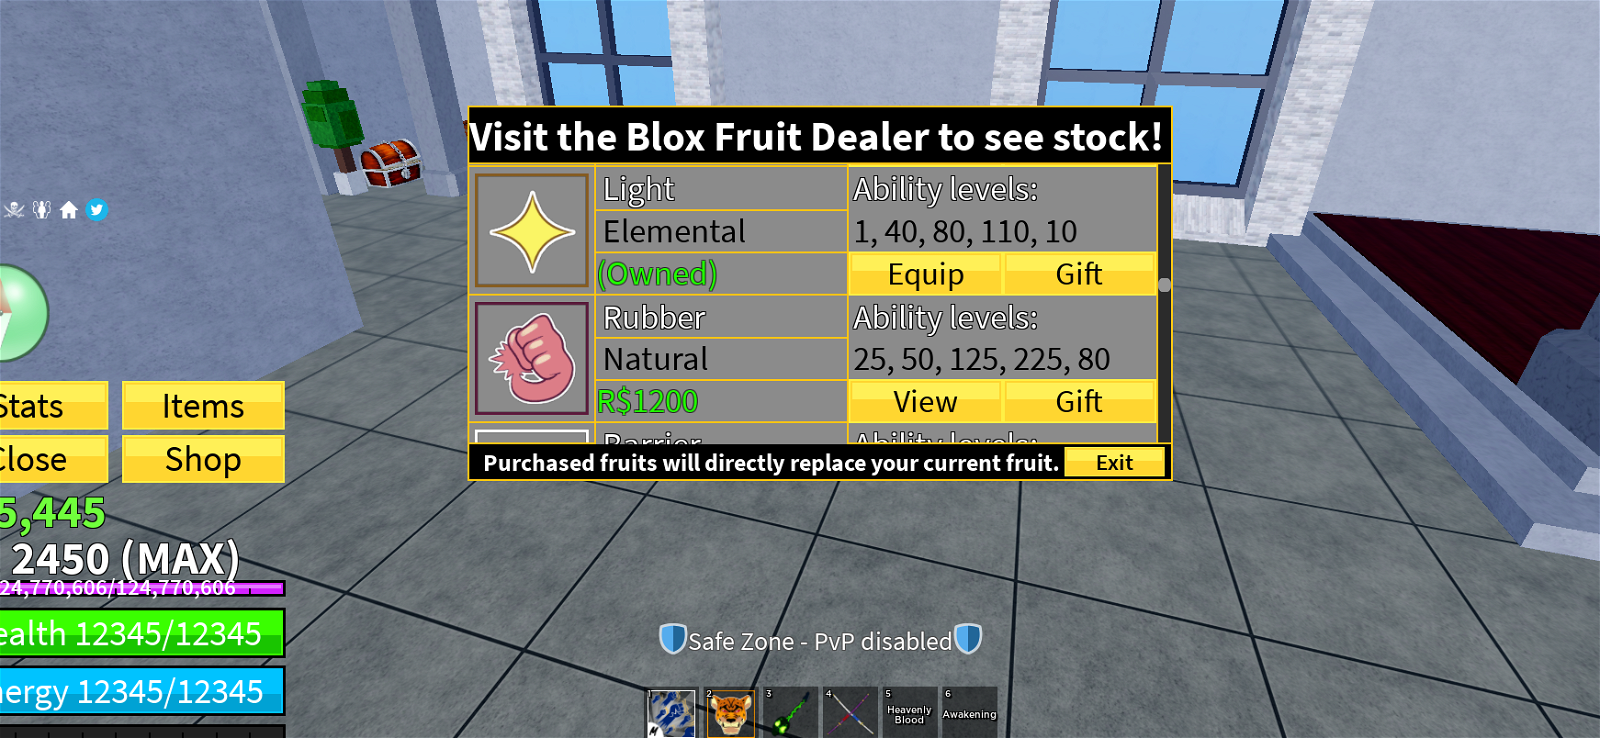 Awakening price in blox fruits for all fruits. Join the discord